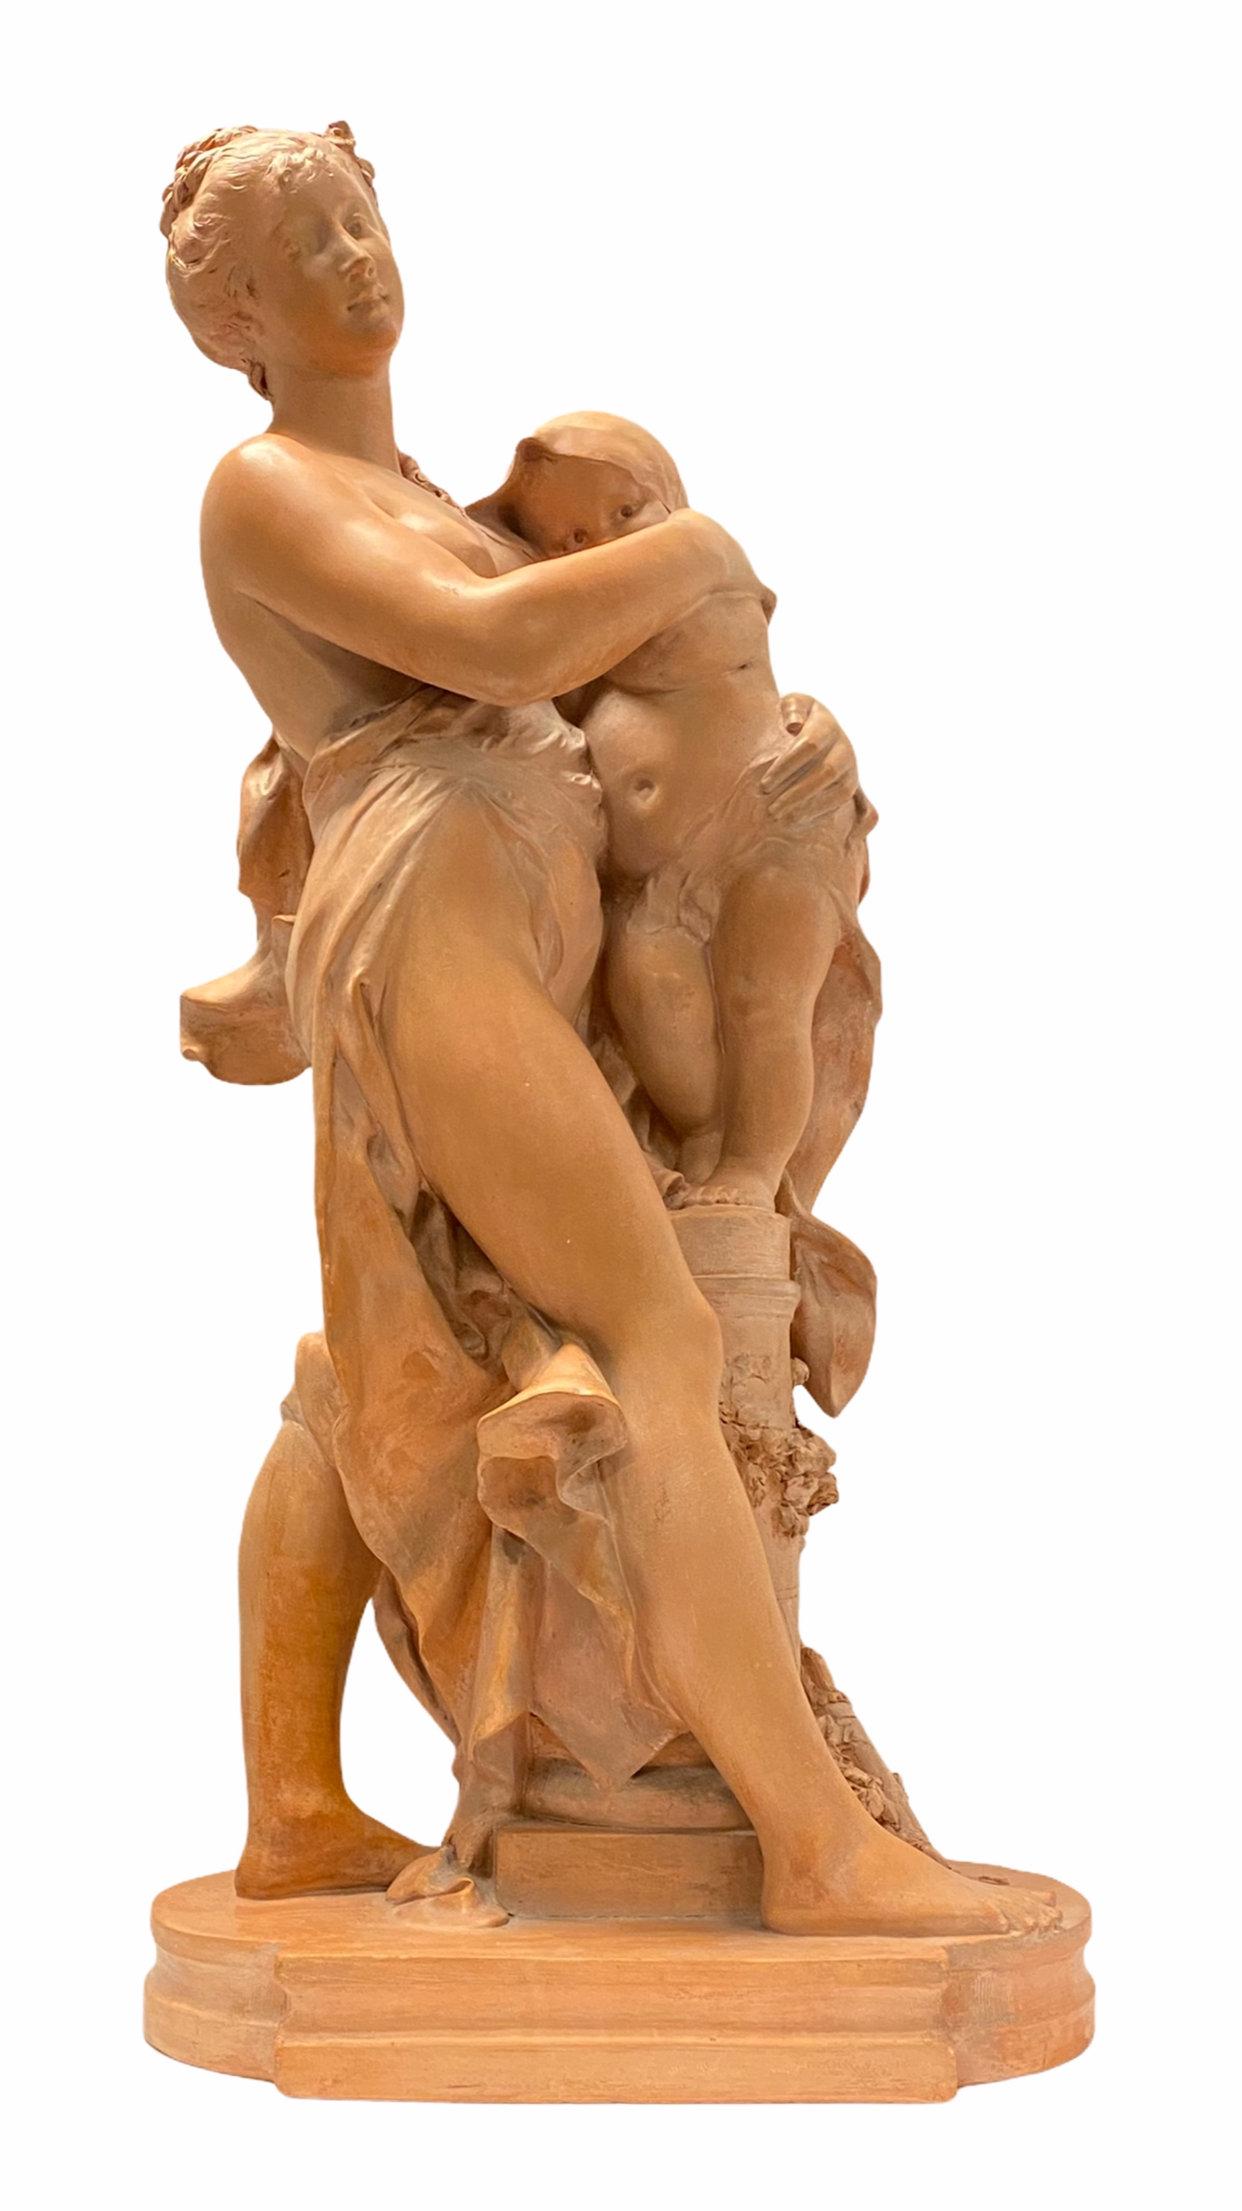 Very fine quality French 19 century Mother and Child Terracotta Sculpture Signed Rougelet ( Benoît.
Benoît (Benedict) Rougelet (FRENCH, 1834–1894).